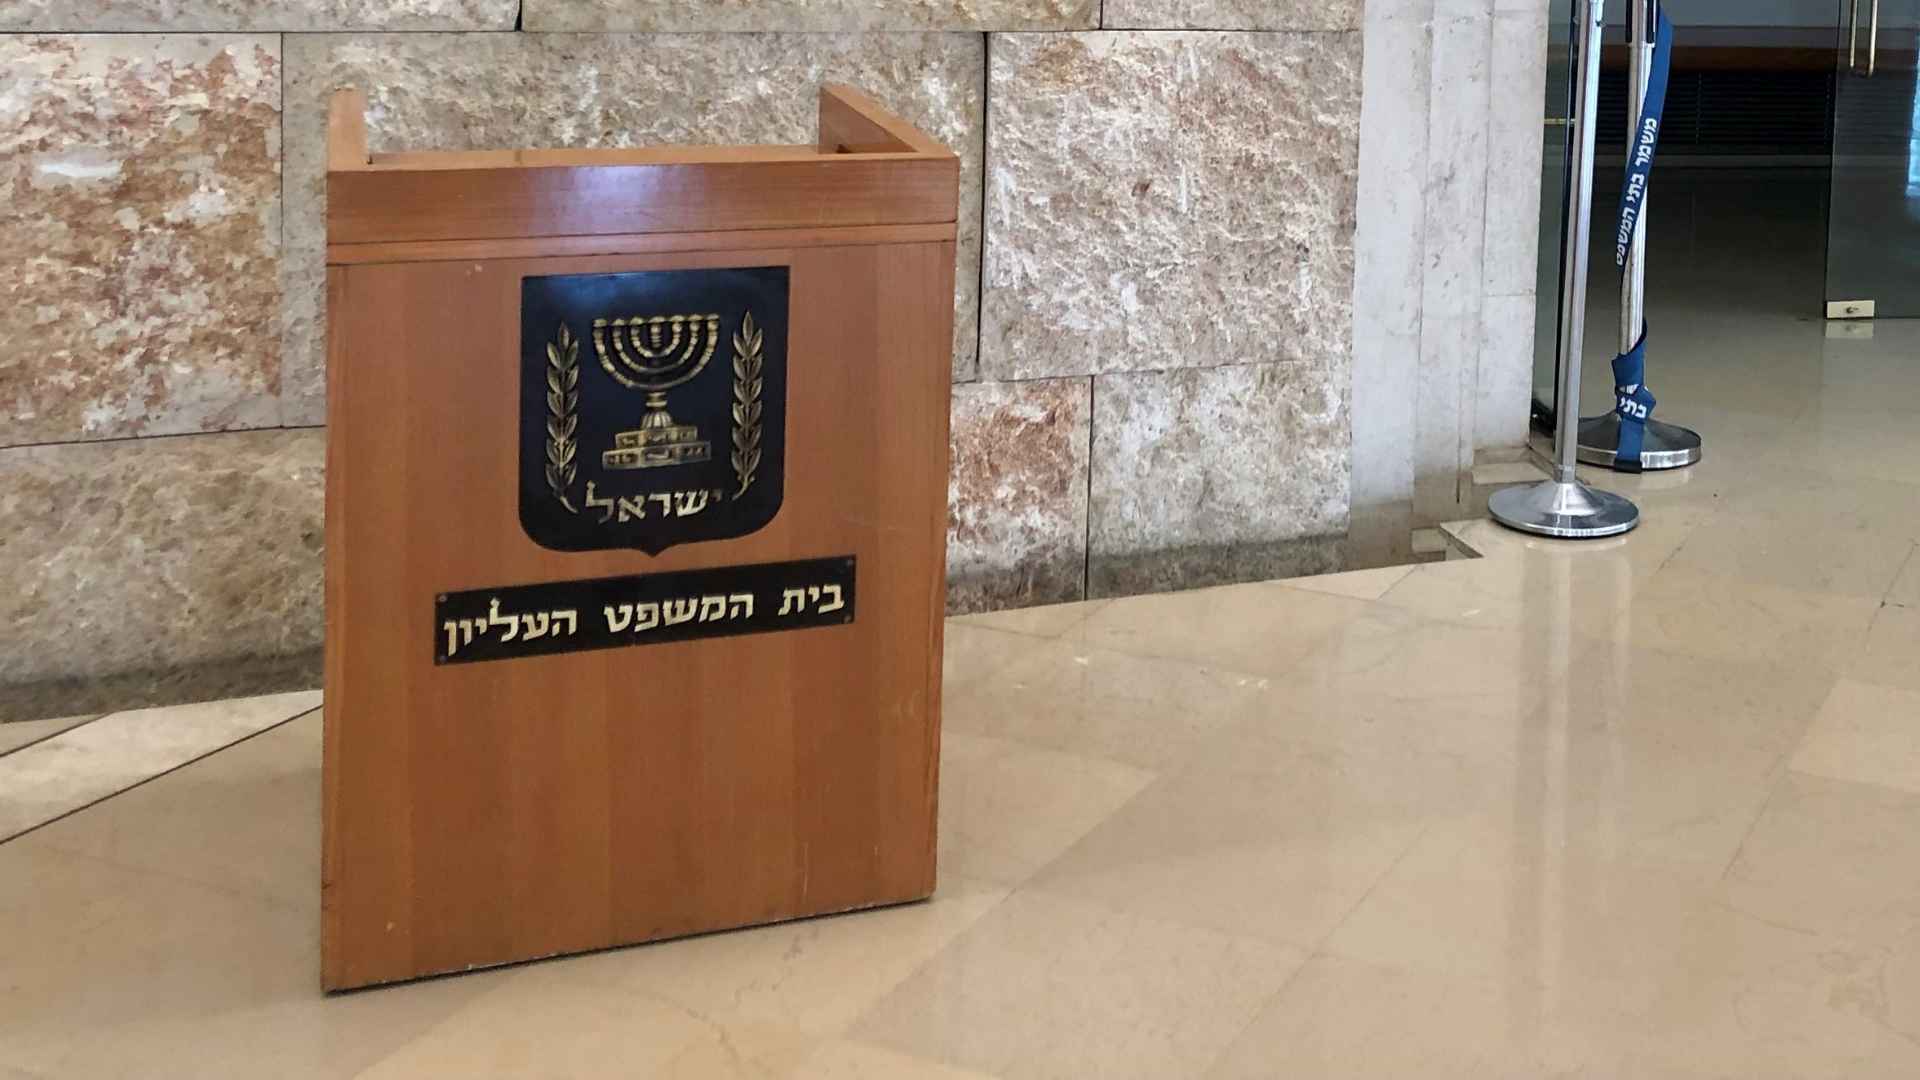 In the corridor's of Israel's Supreme Court